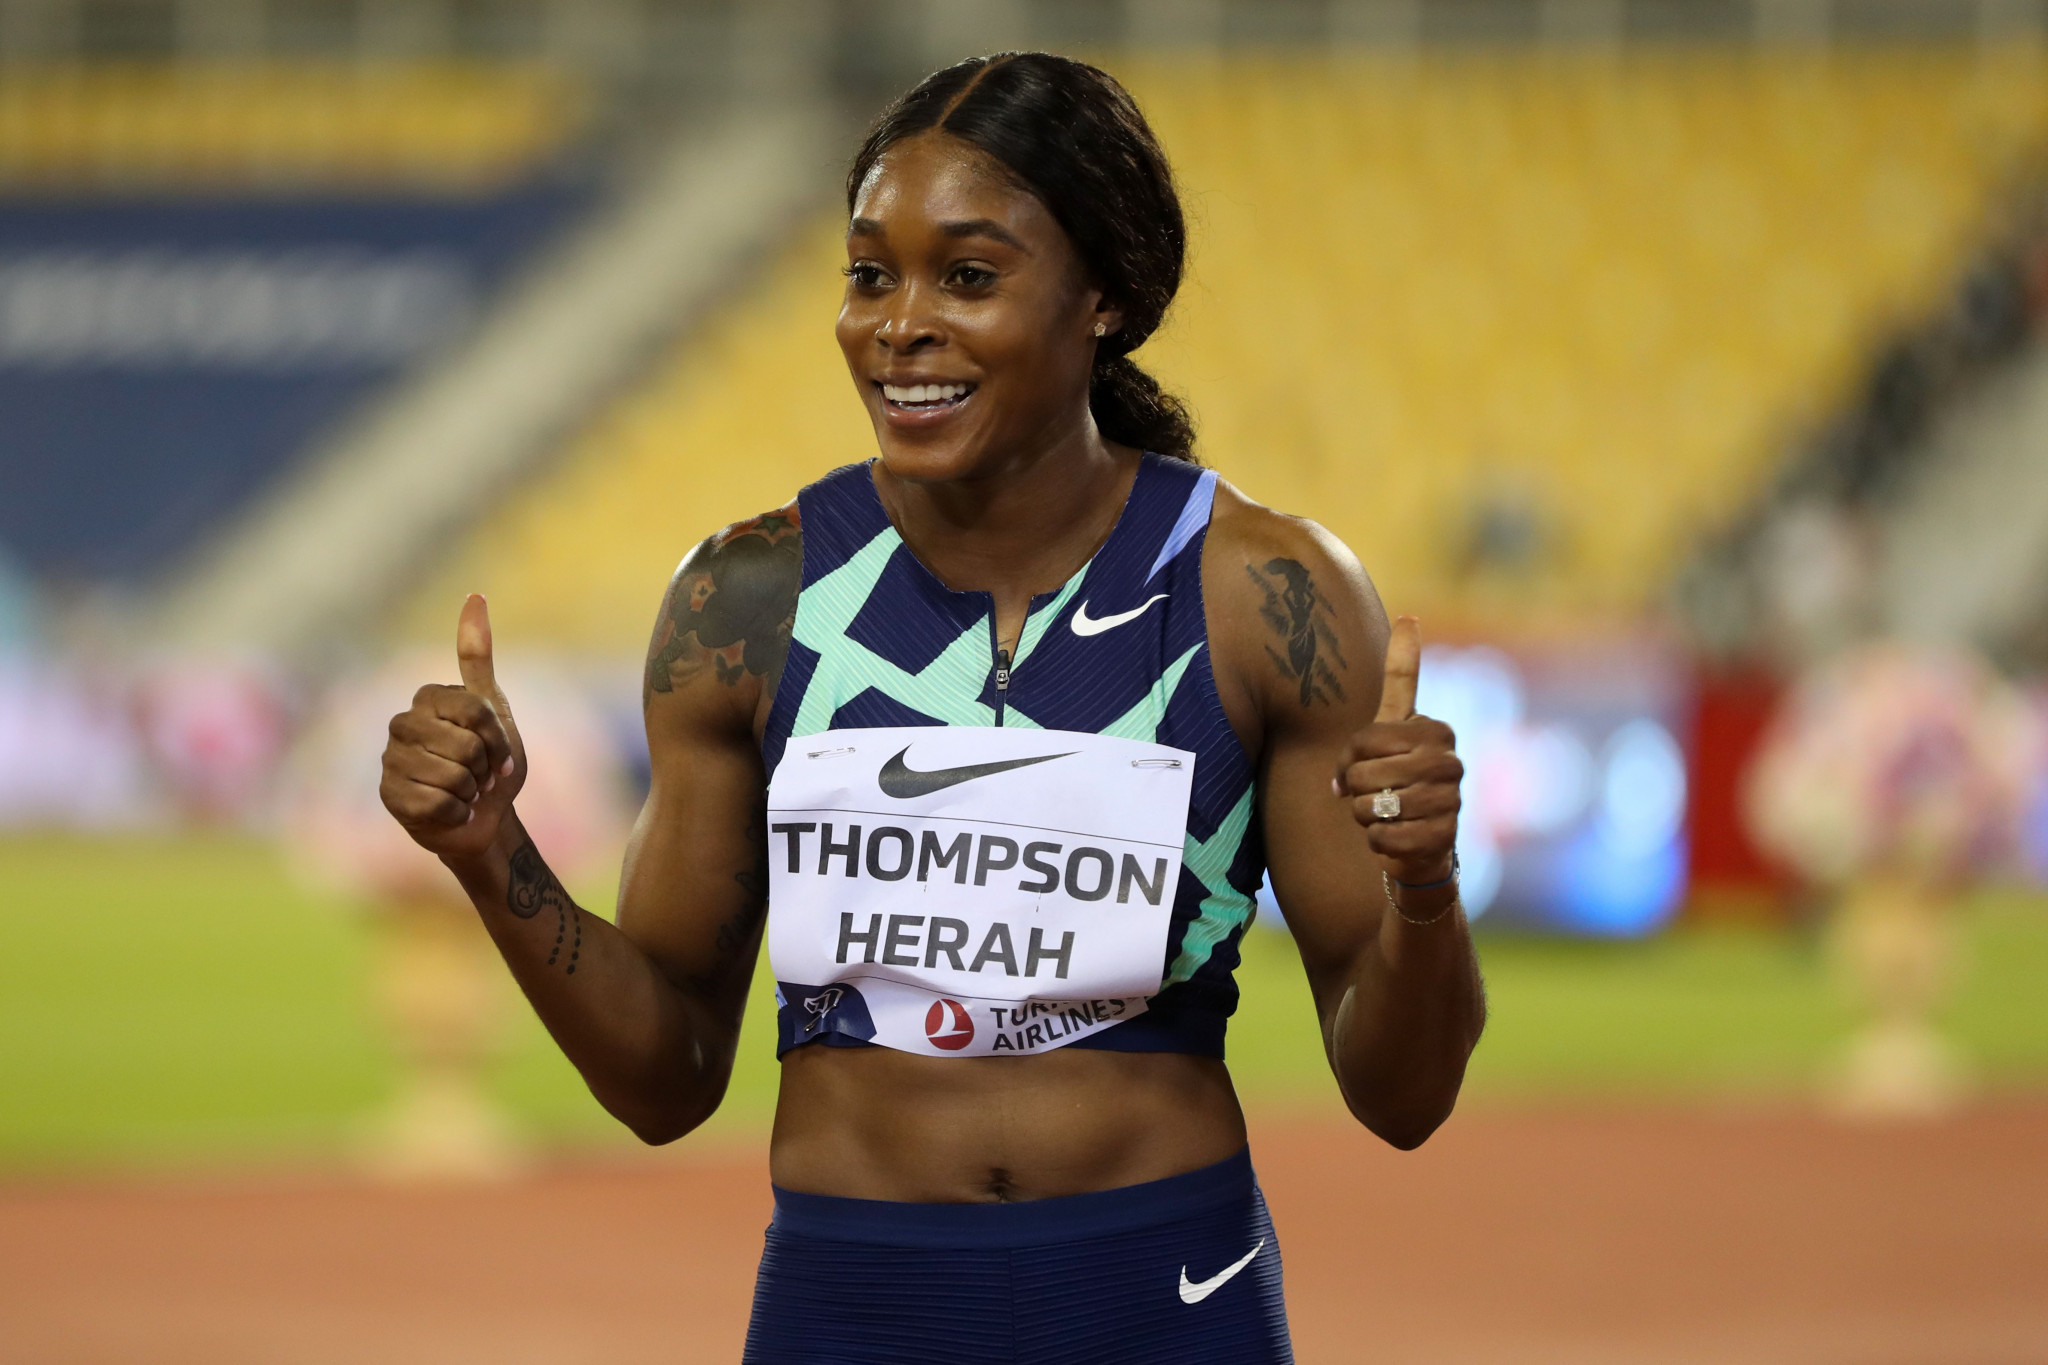 Double Olympic champion Thompson-Herah among five finalists for Female Athlete of the Year